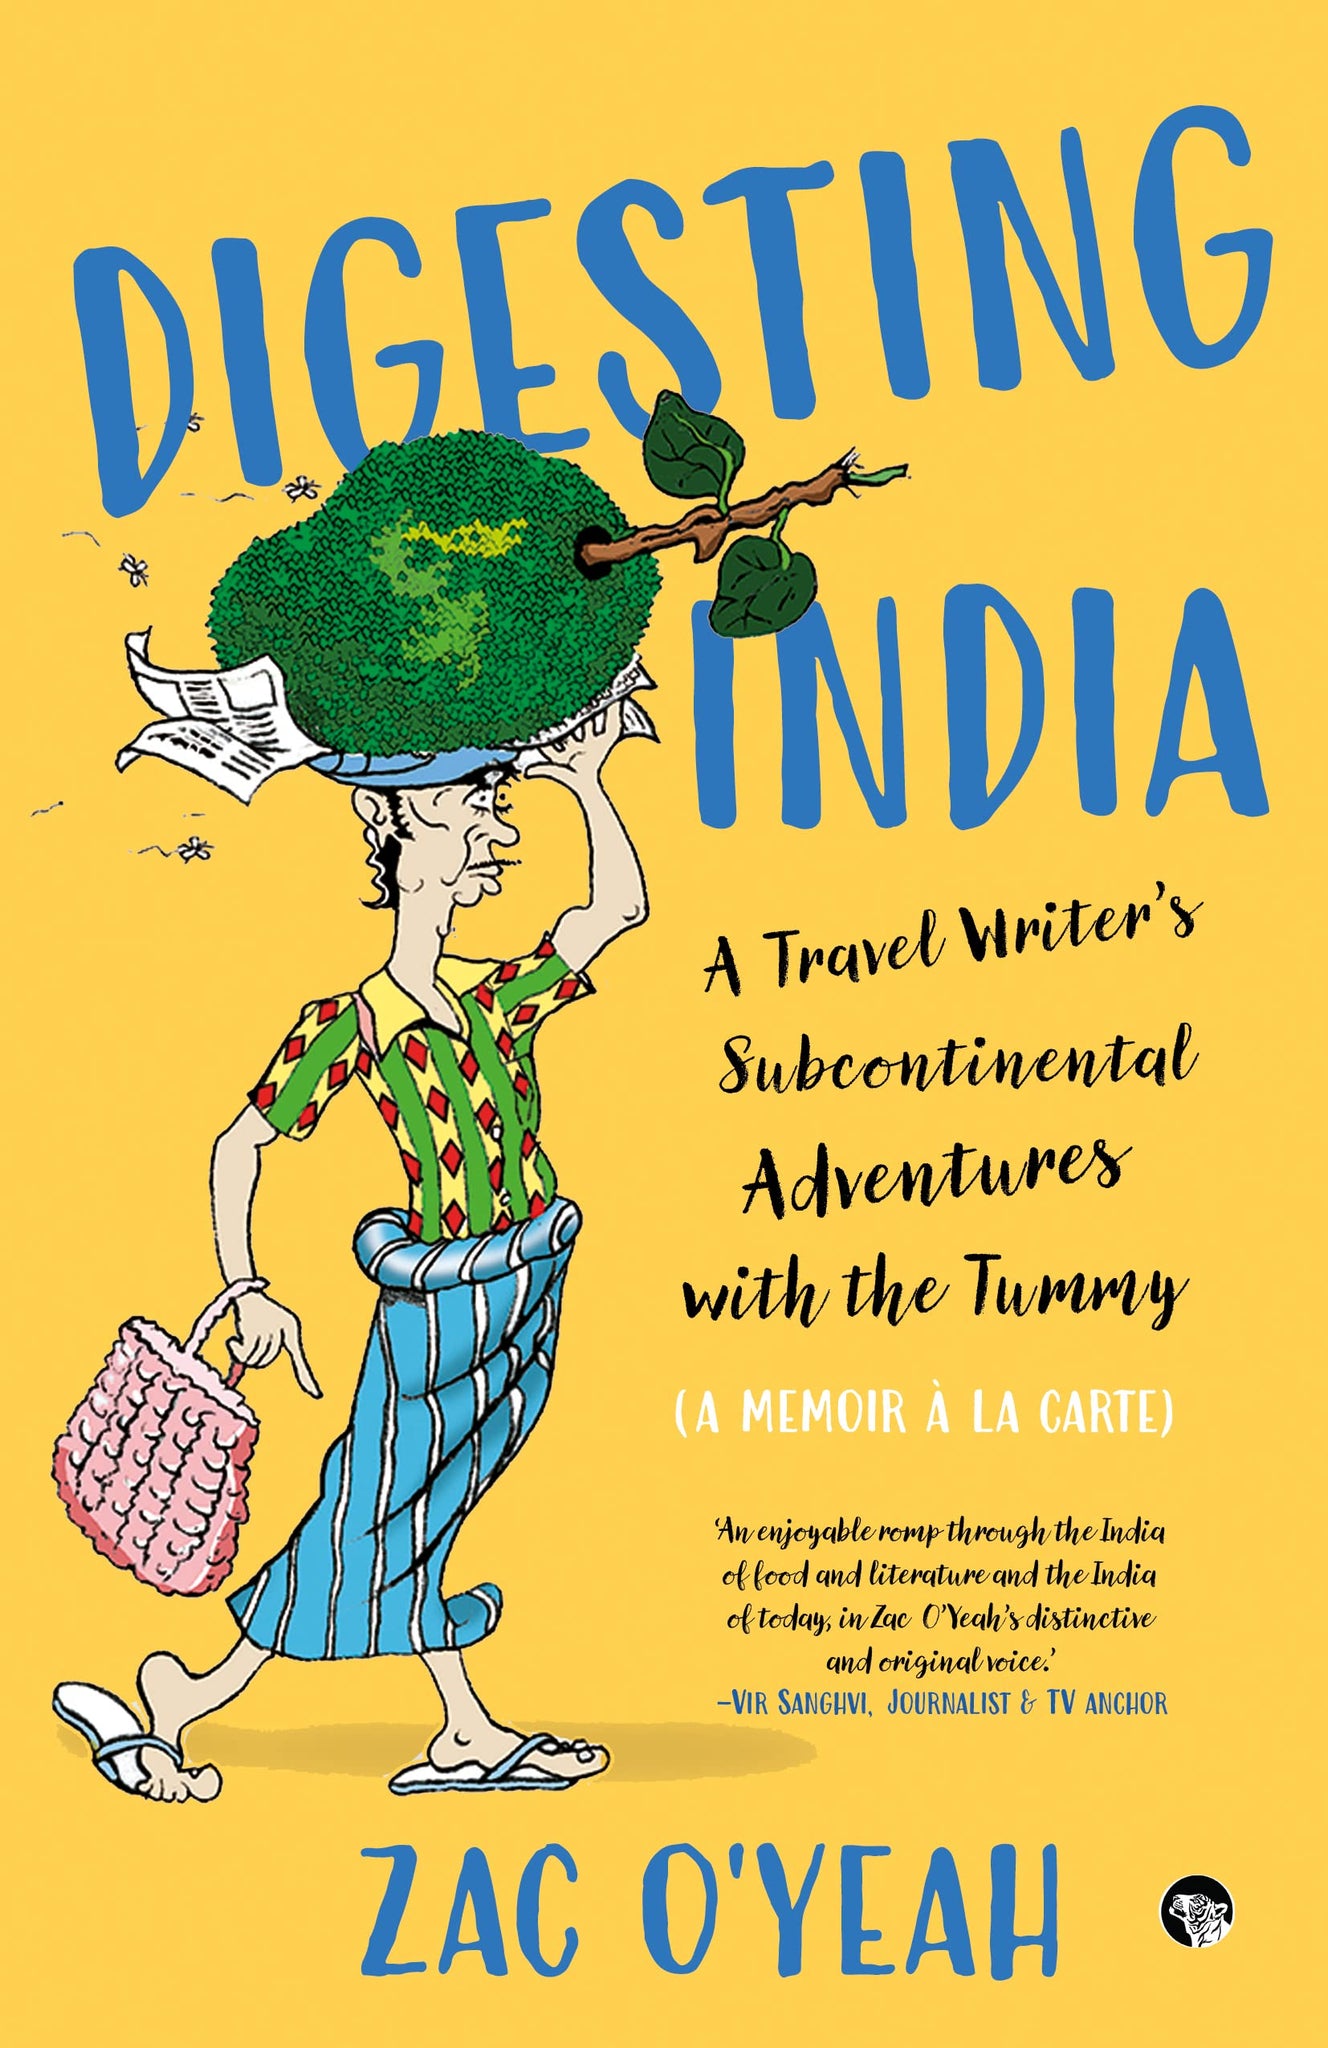 Digesting India: A Travel Writer’s Sub-Continental Adventures With The Tummy